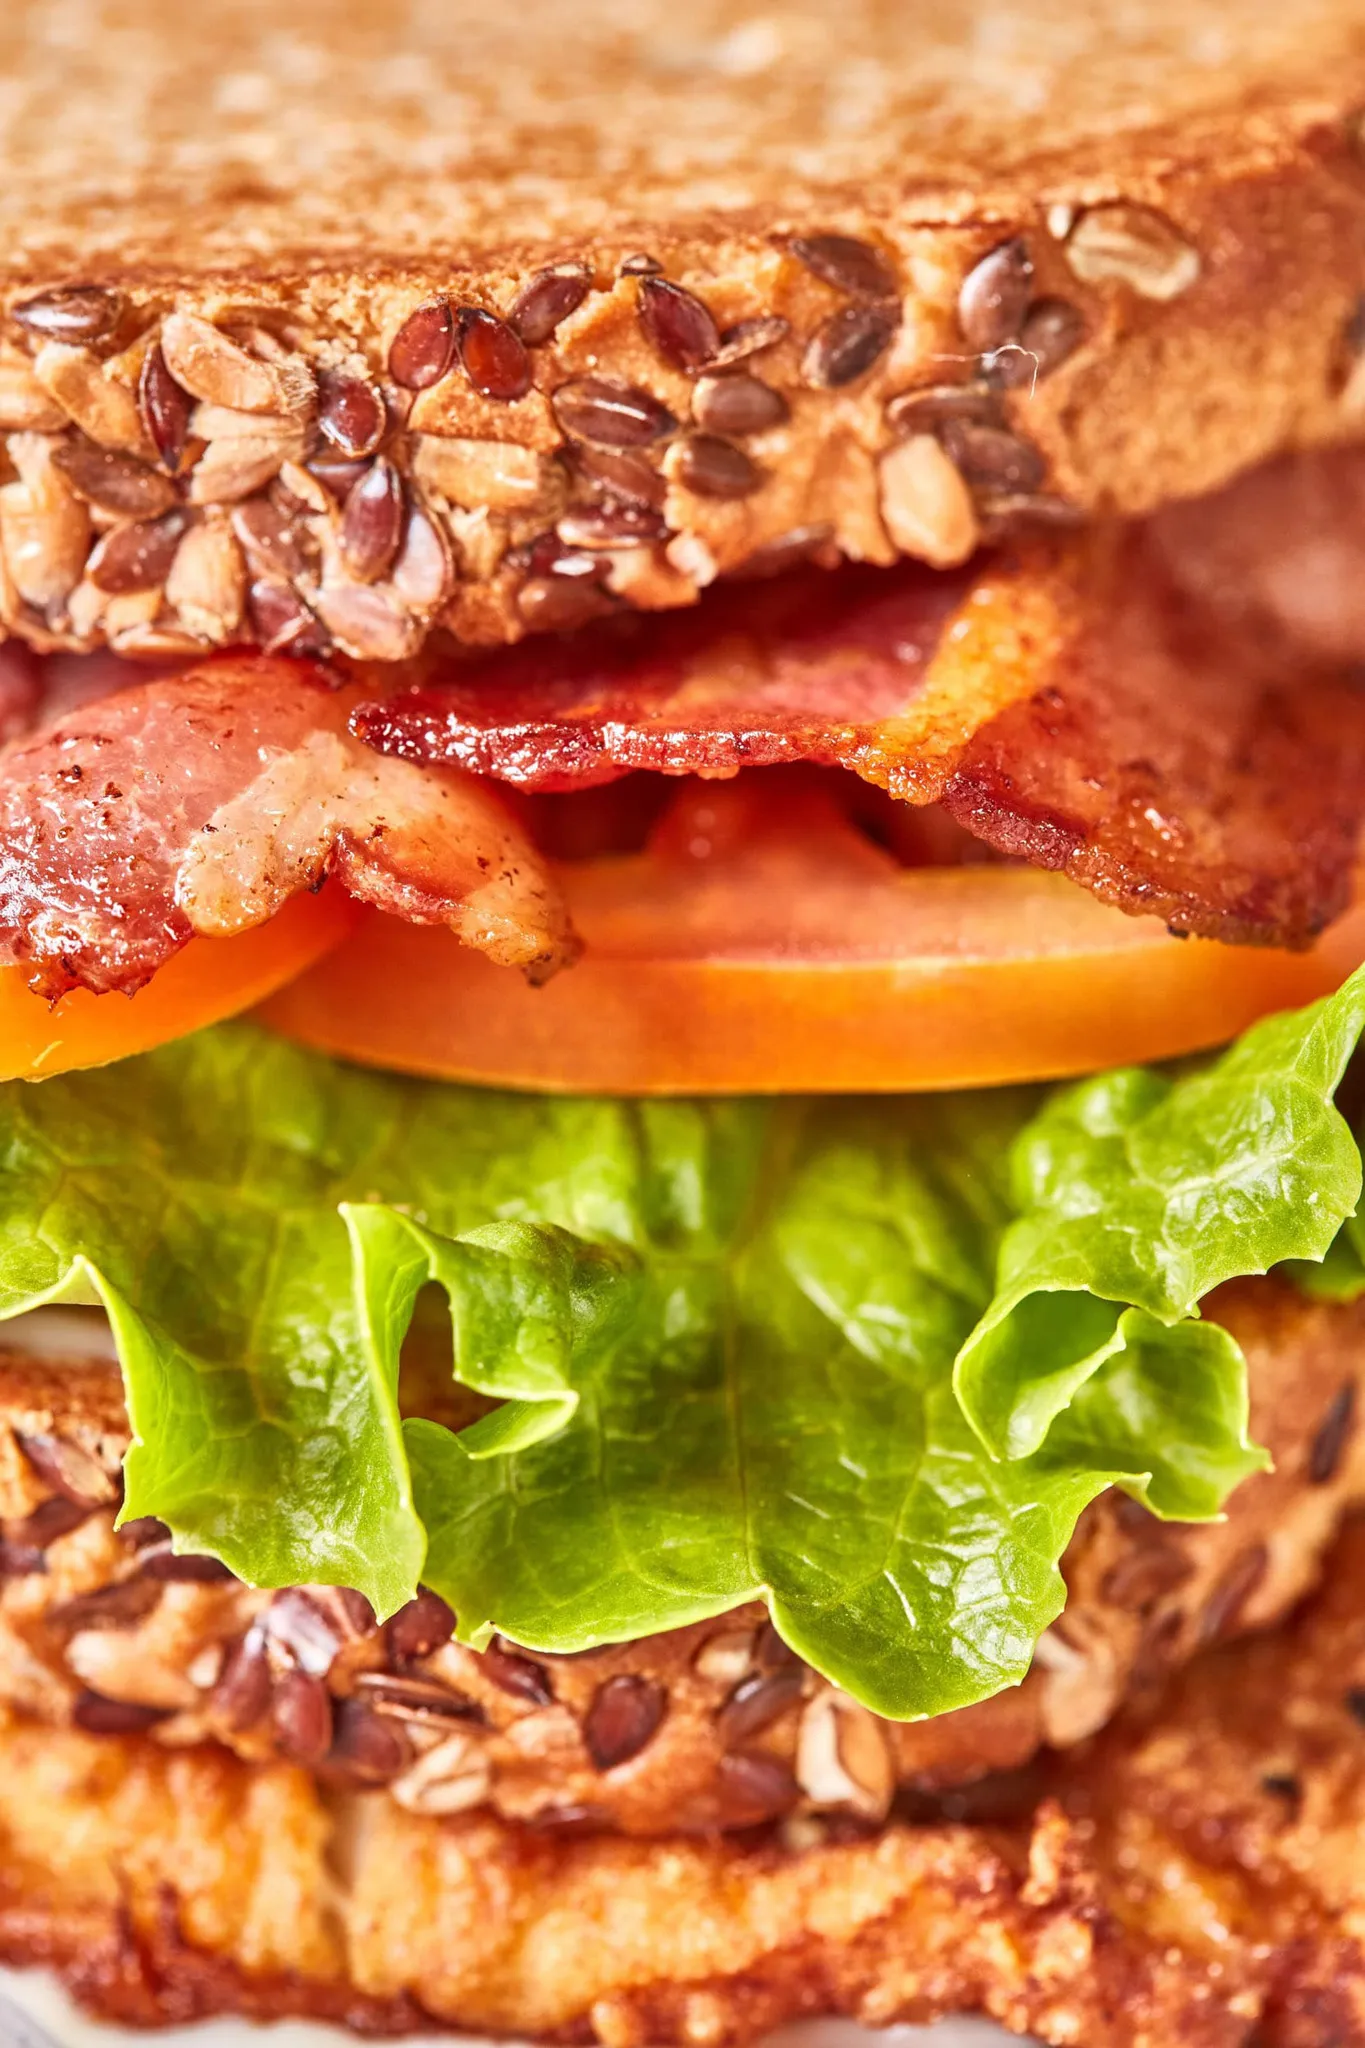 Closeup of a BLT sandwich with crispy bacon and seeded bread